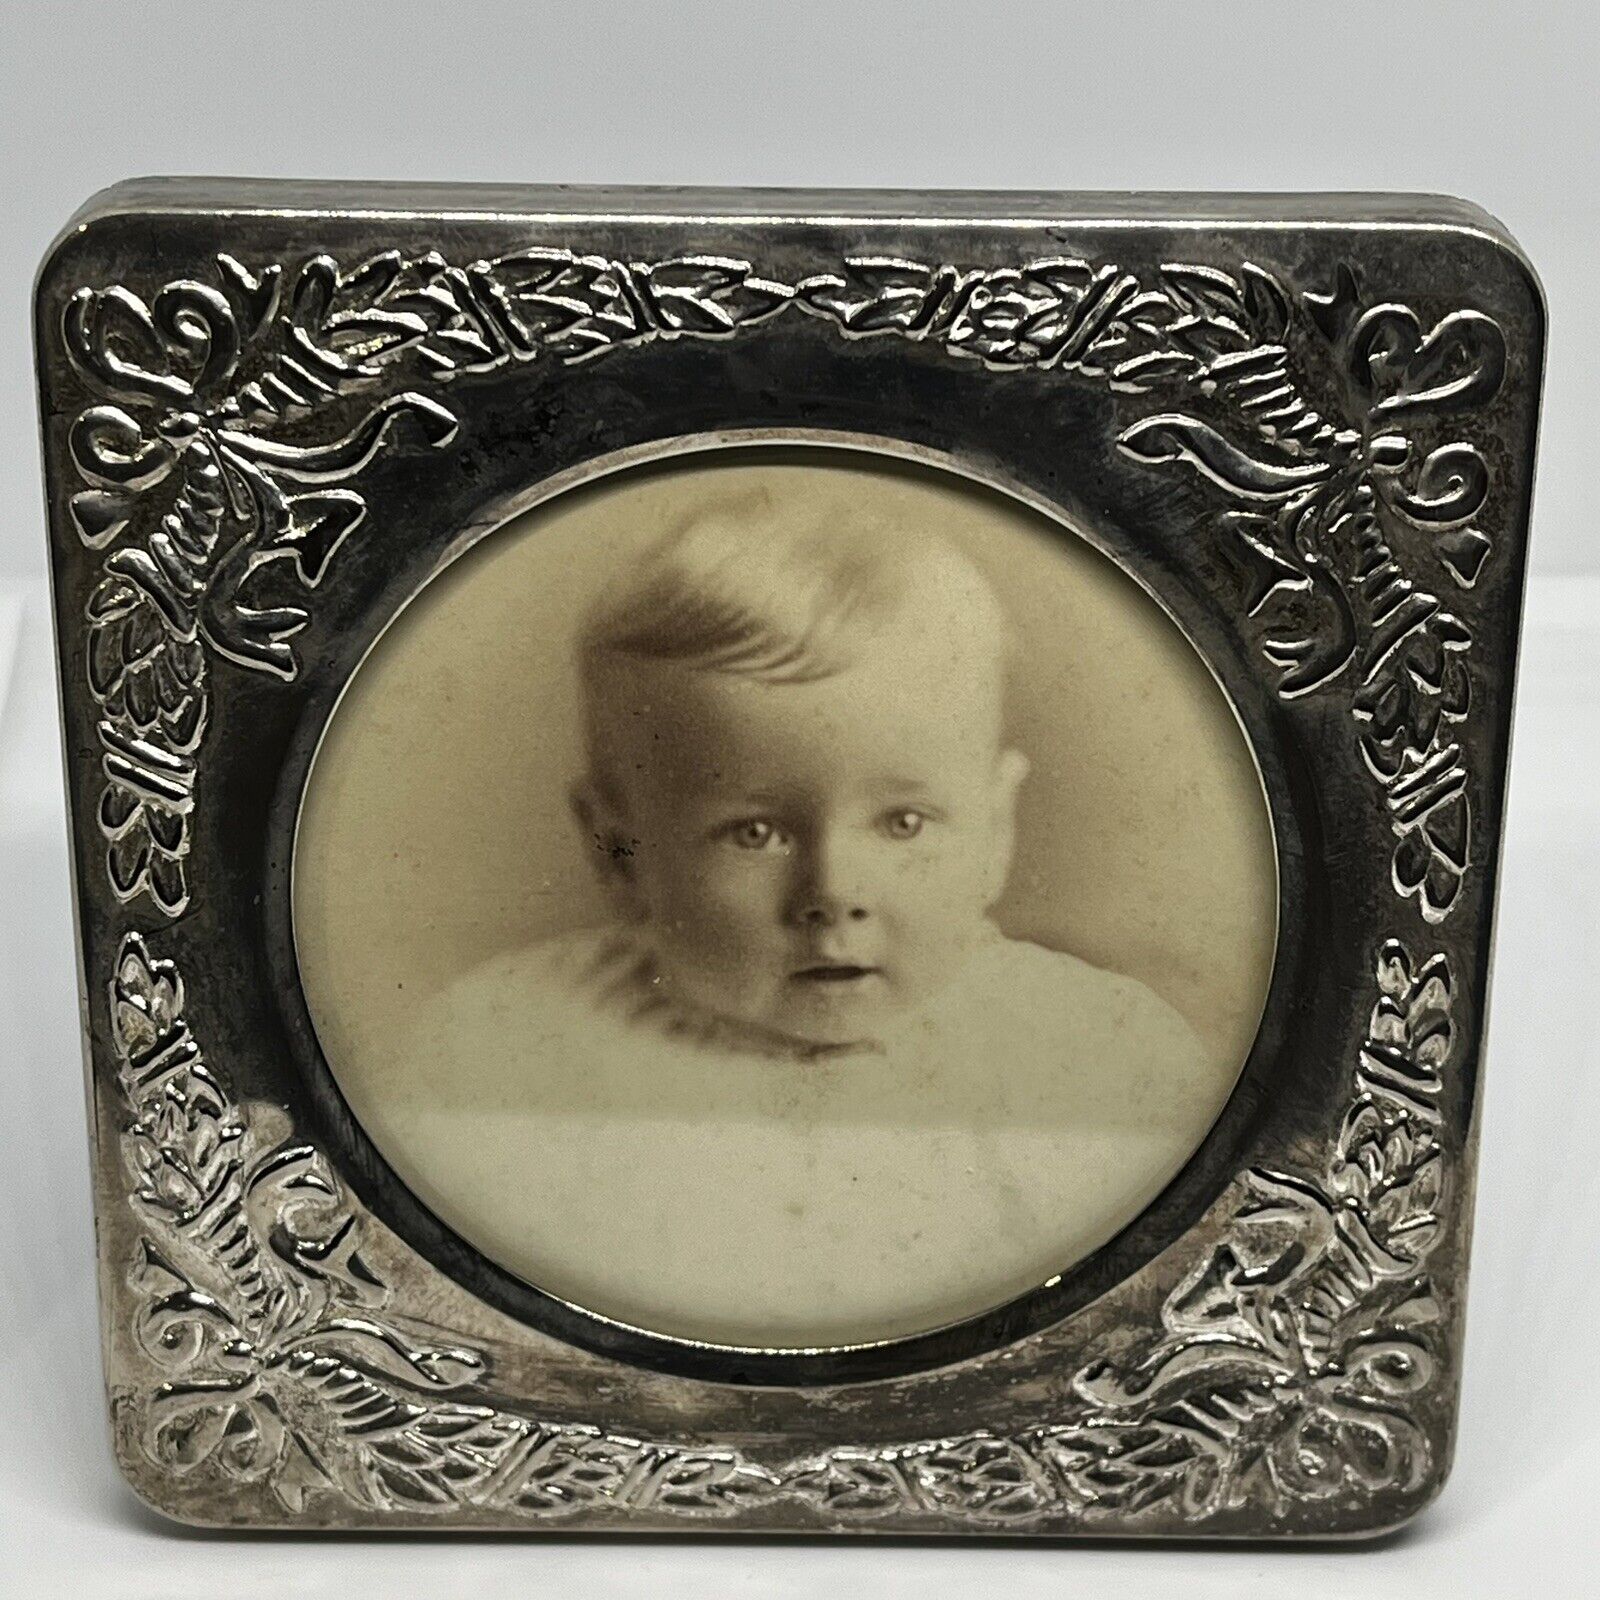 Antique Framed Photo Baby Boy Dated 3-25-1892 Victorian Era Silver Tone Frame